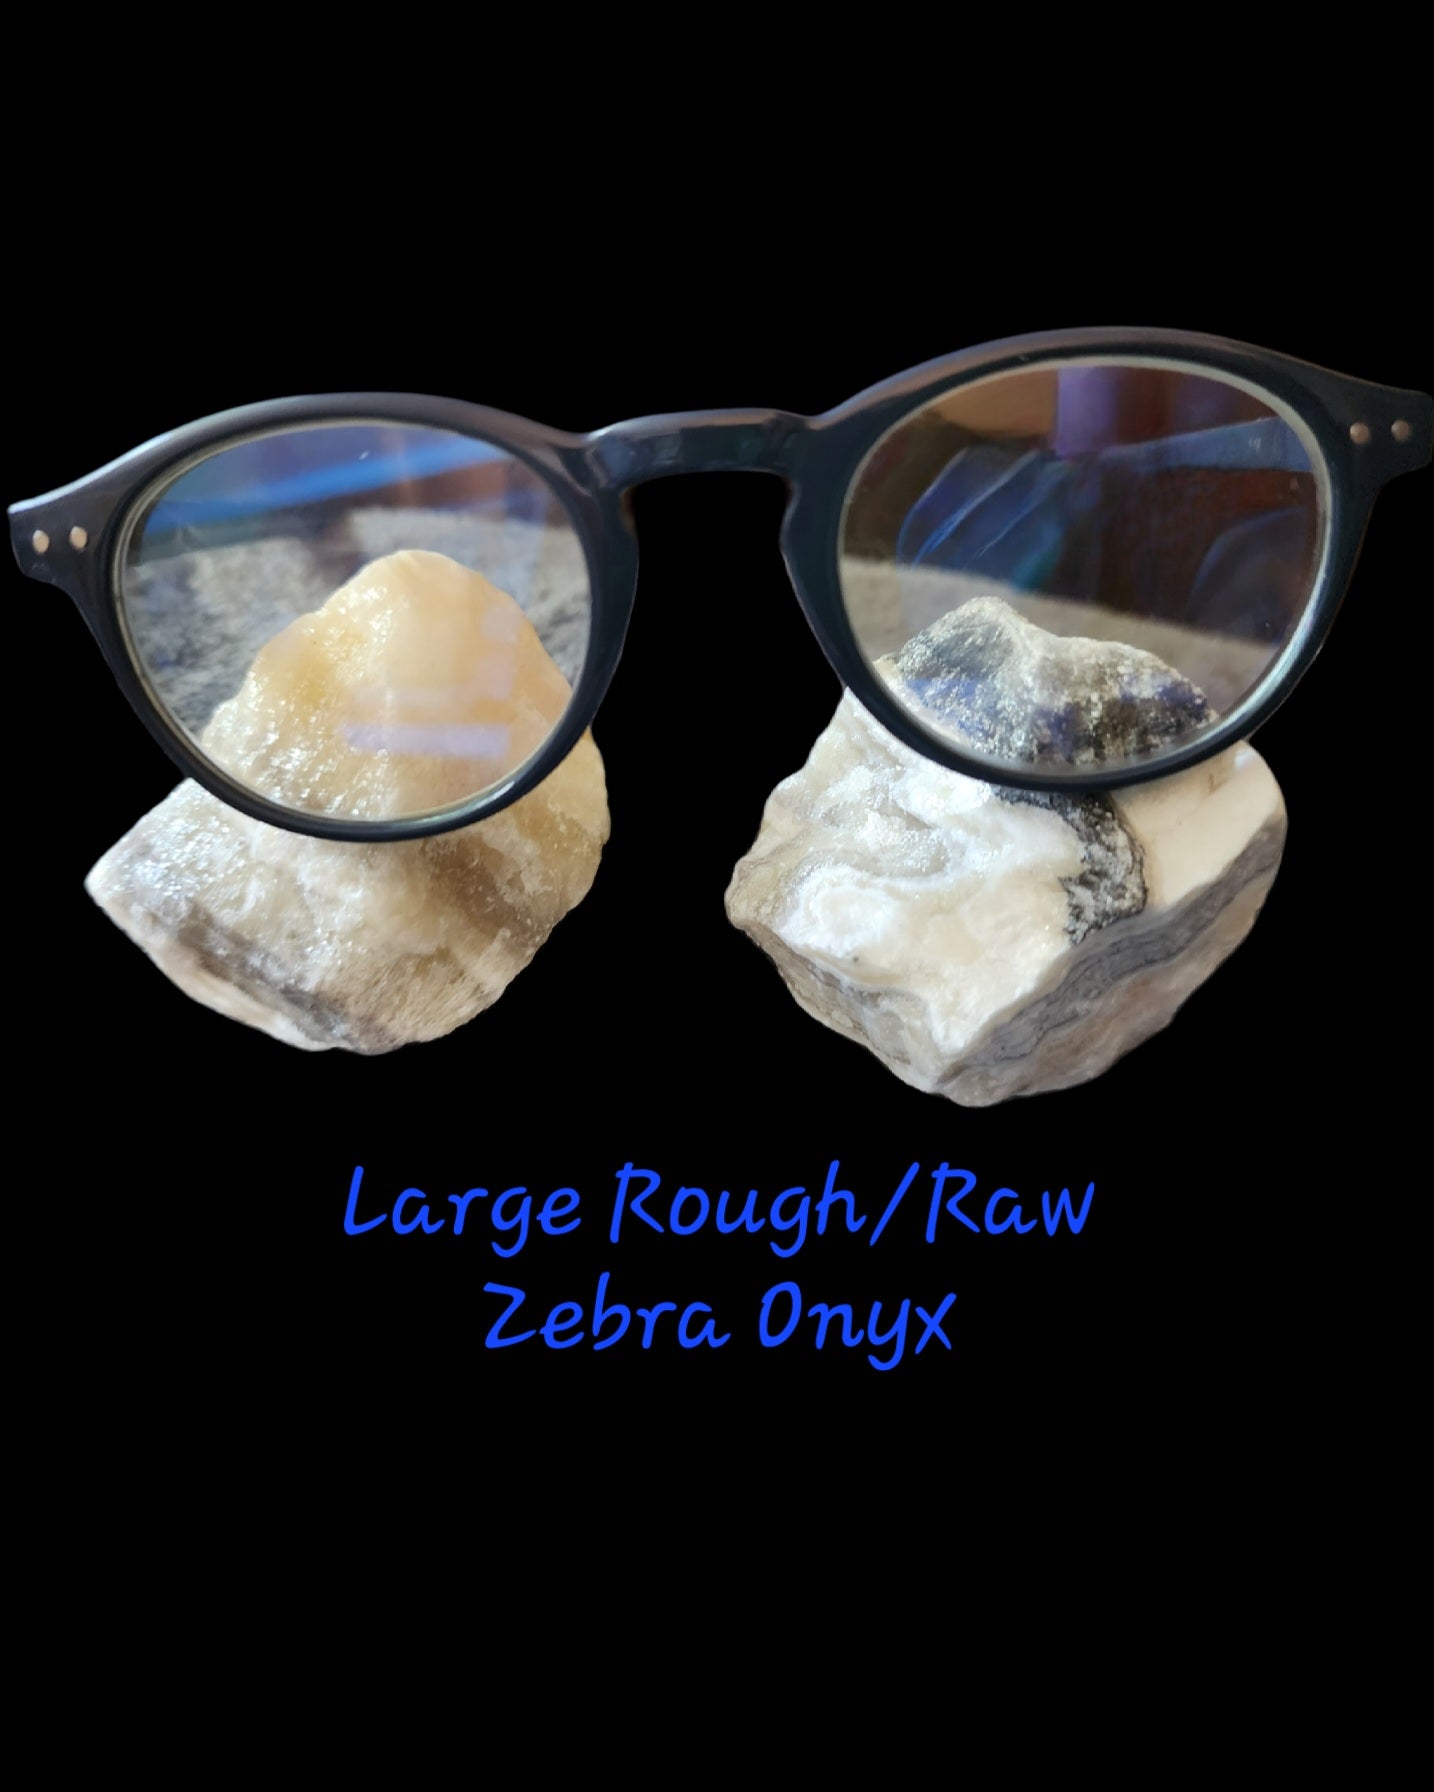 Raw Zebra Onyx Stone (Mexican Onyx) Grounding, Intuition, Inner Strength, Confidence